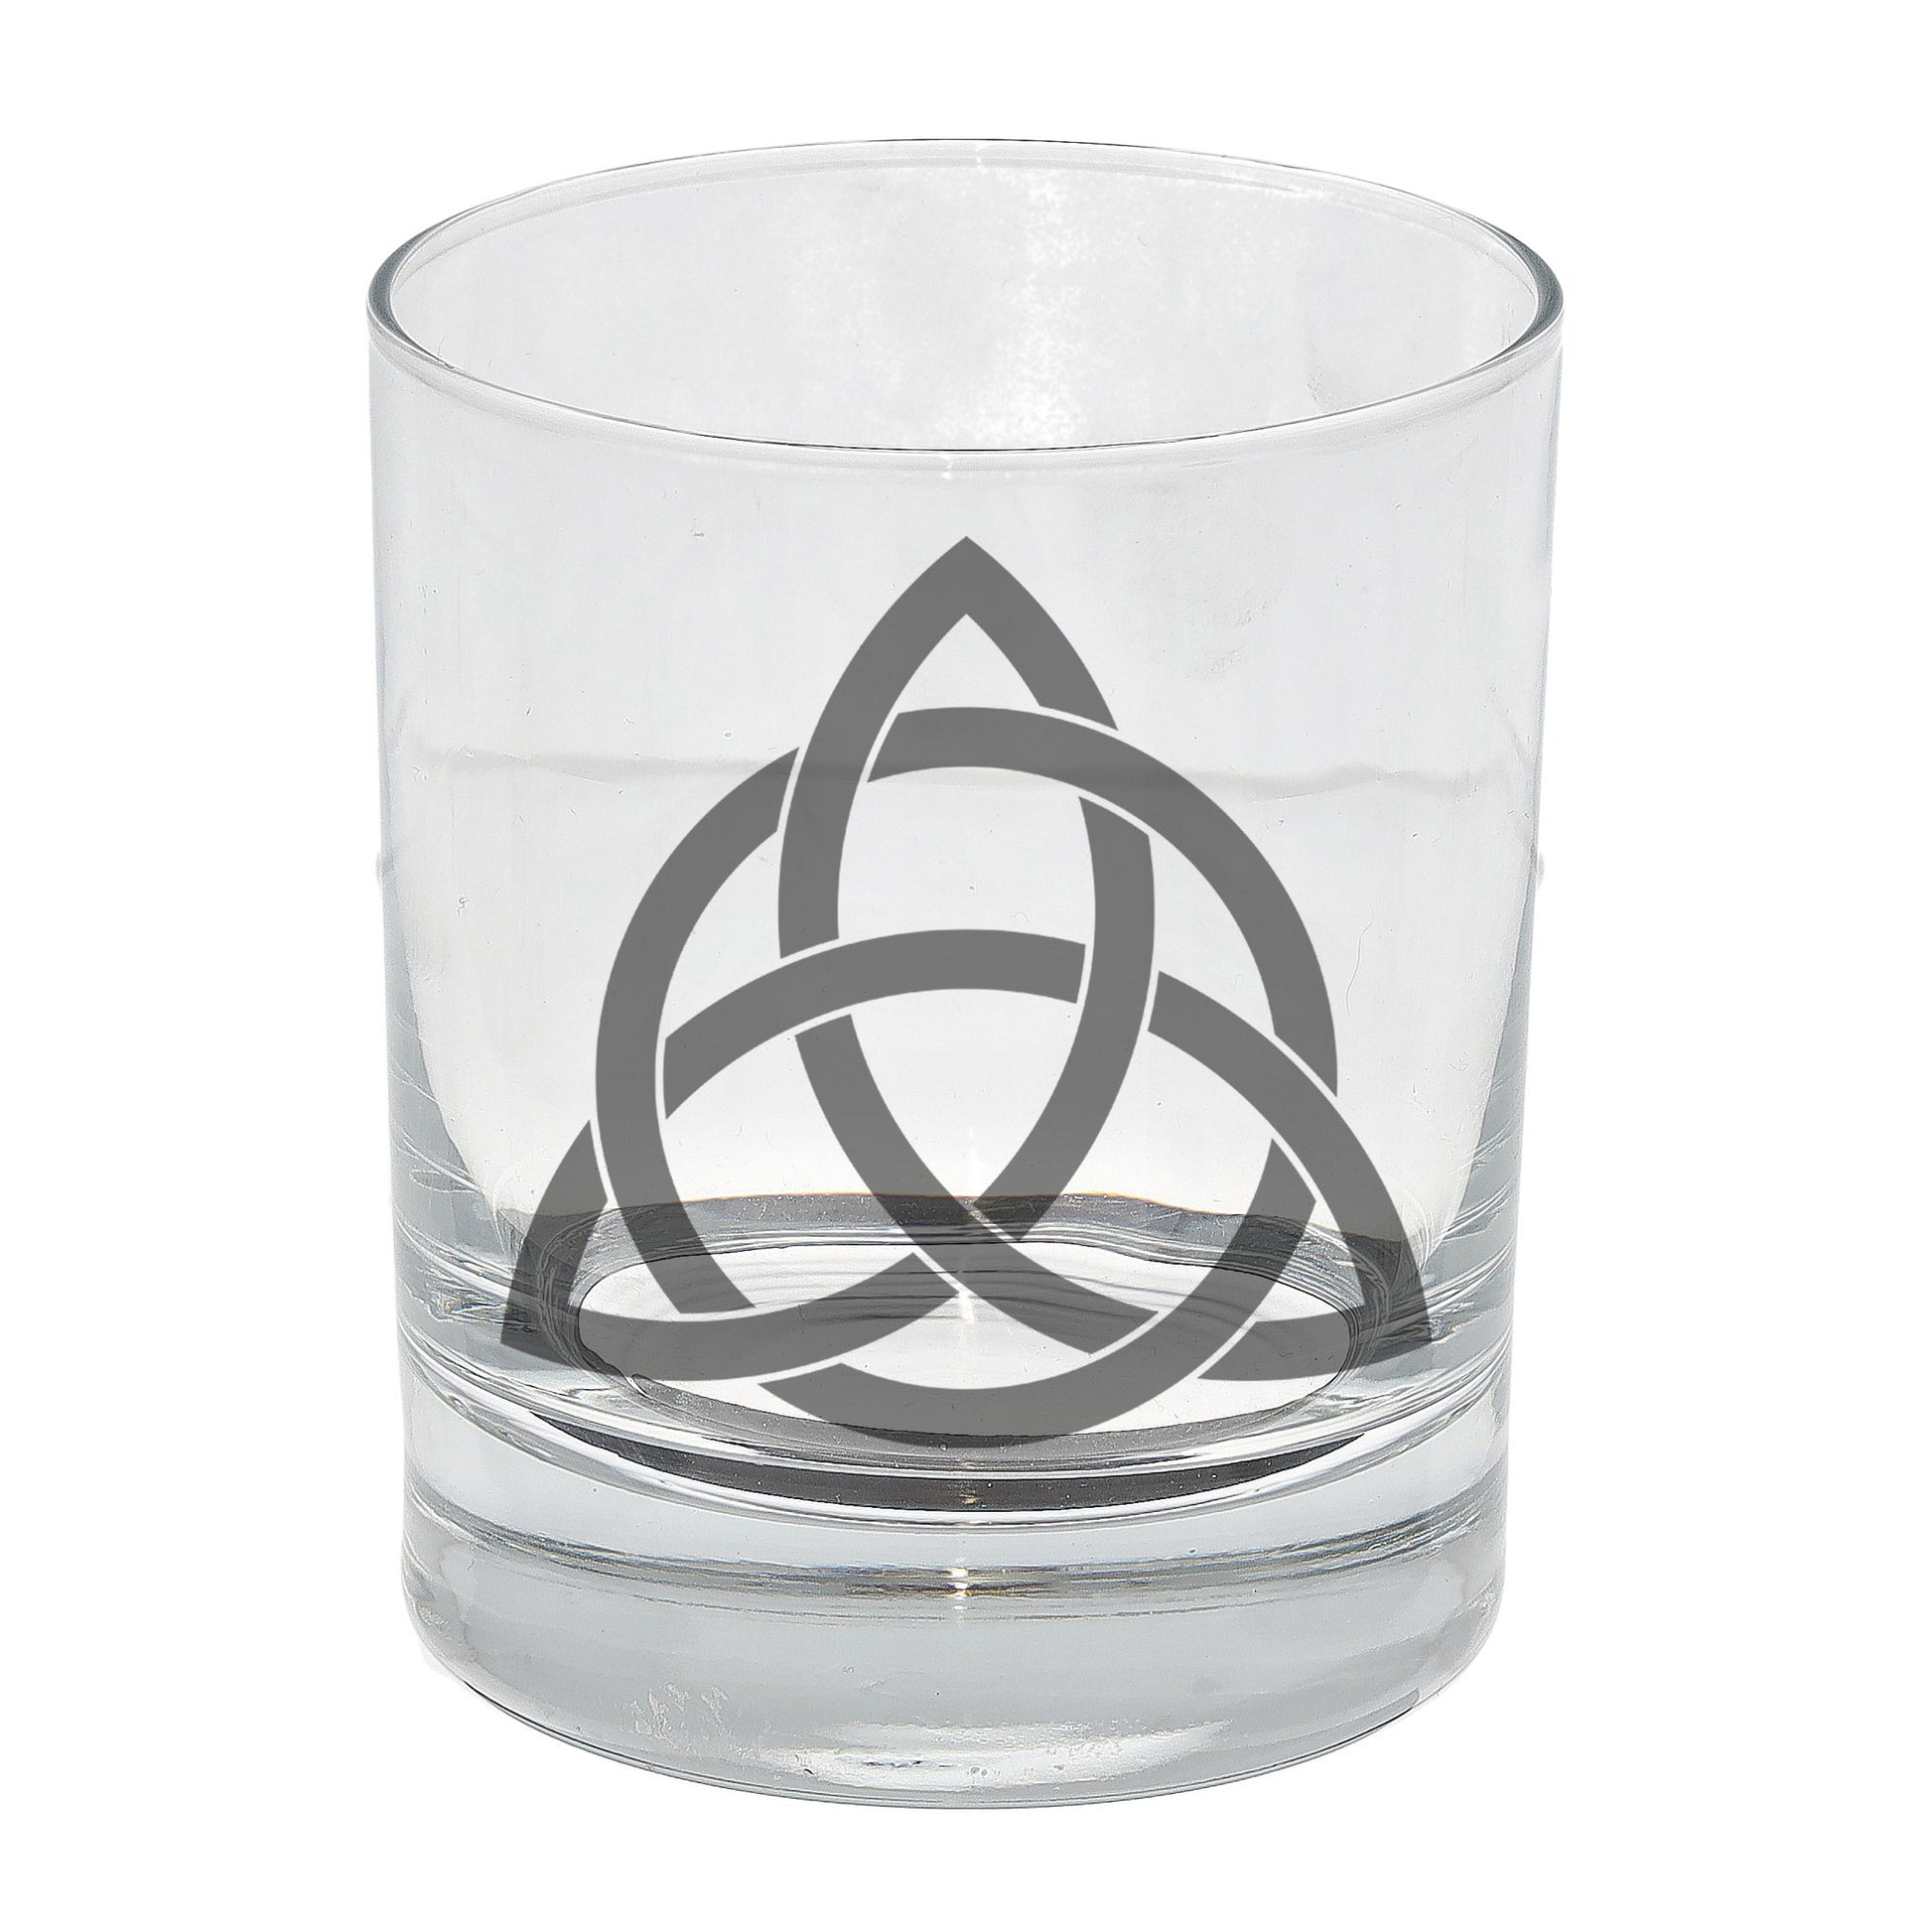 Celtic Knot Engraved Whisky Glass and/or Coaster Set  - Always Looking Good - Whisky Glass Only  